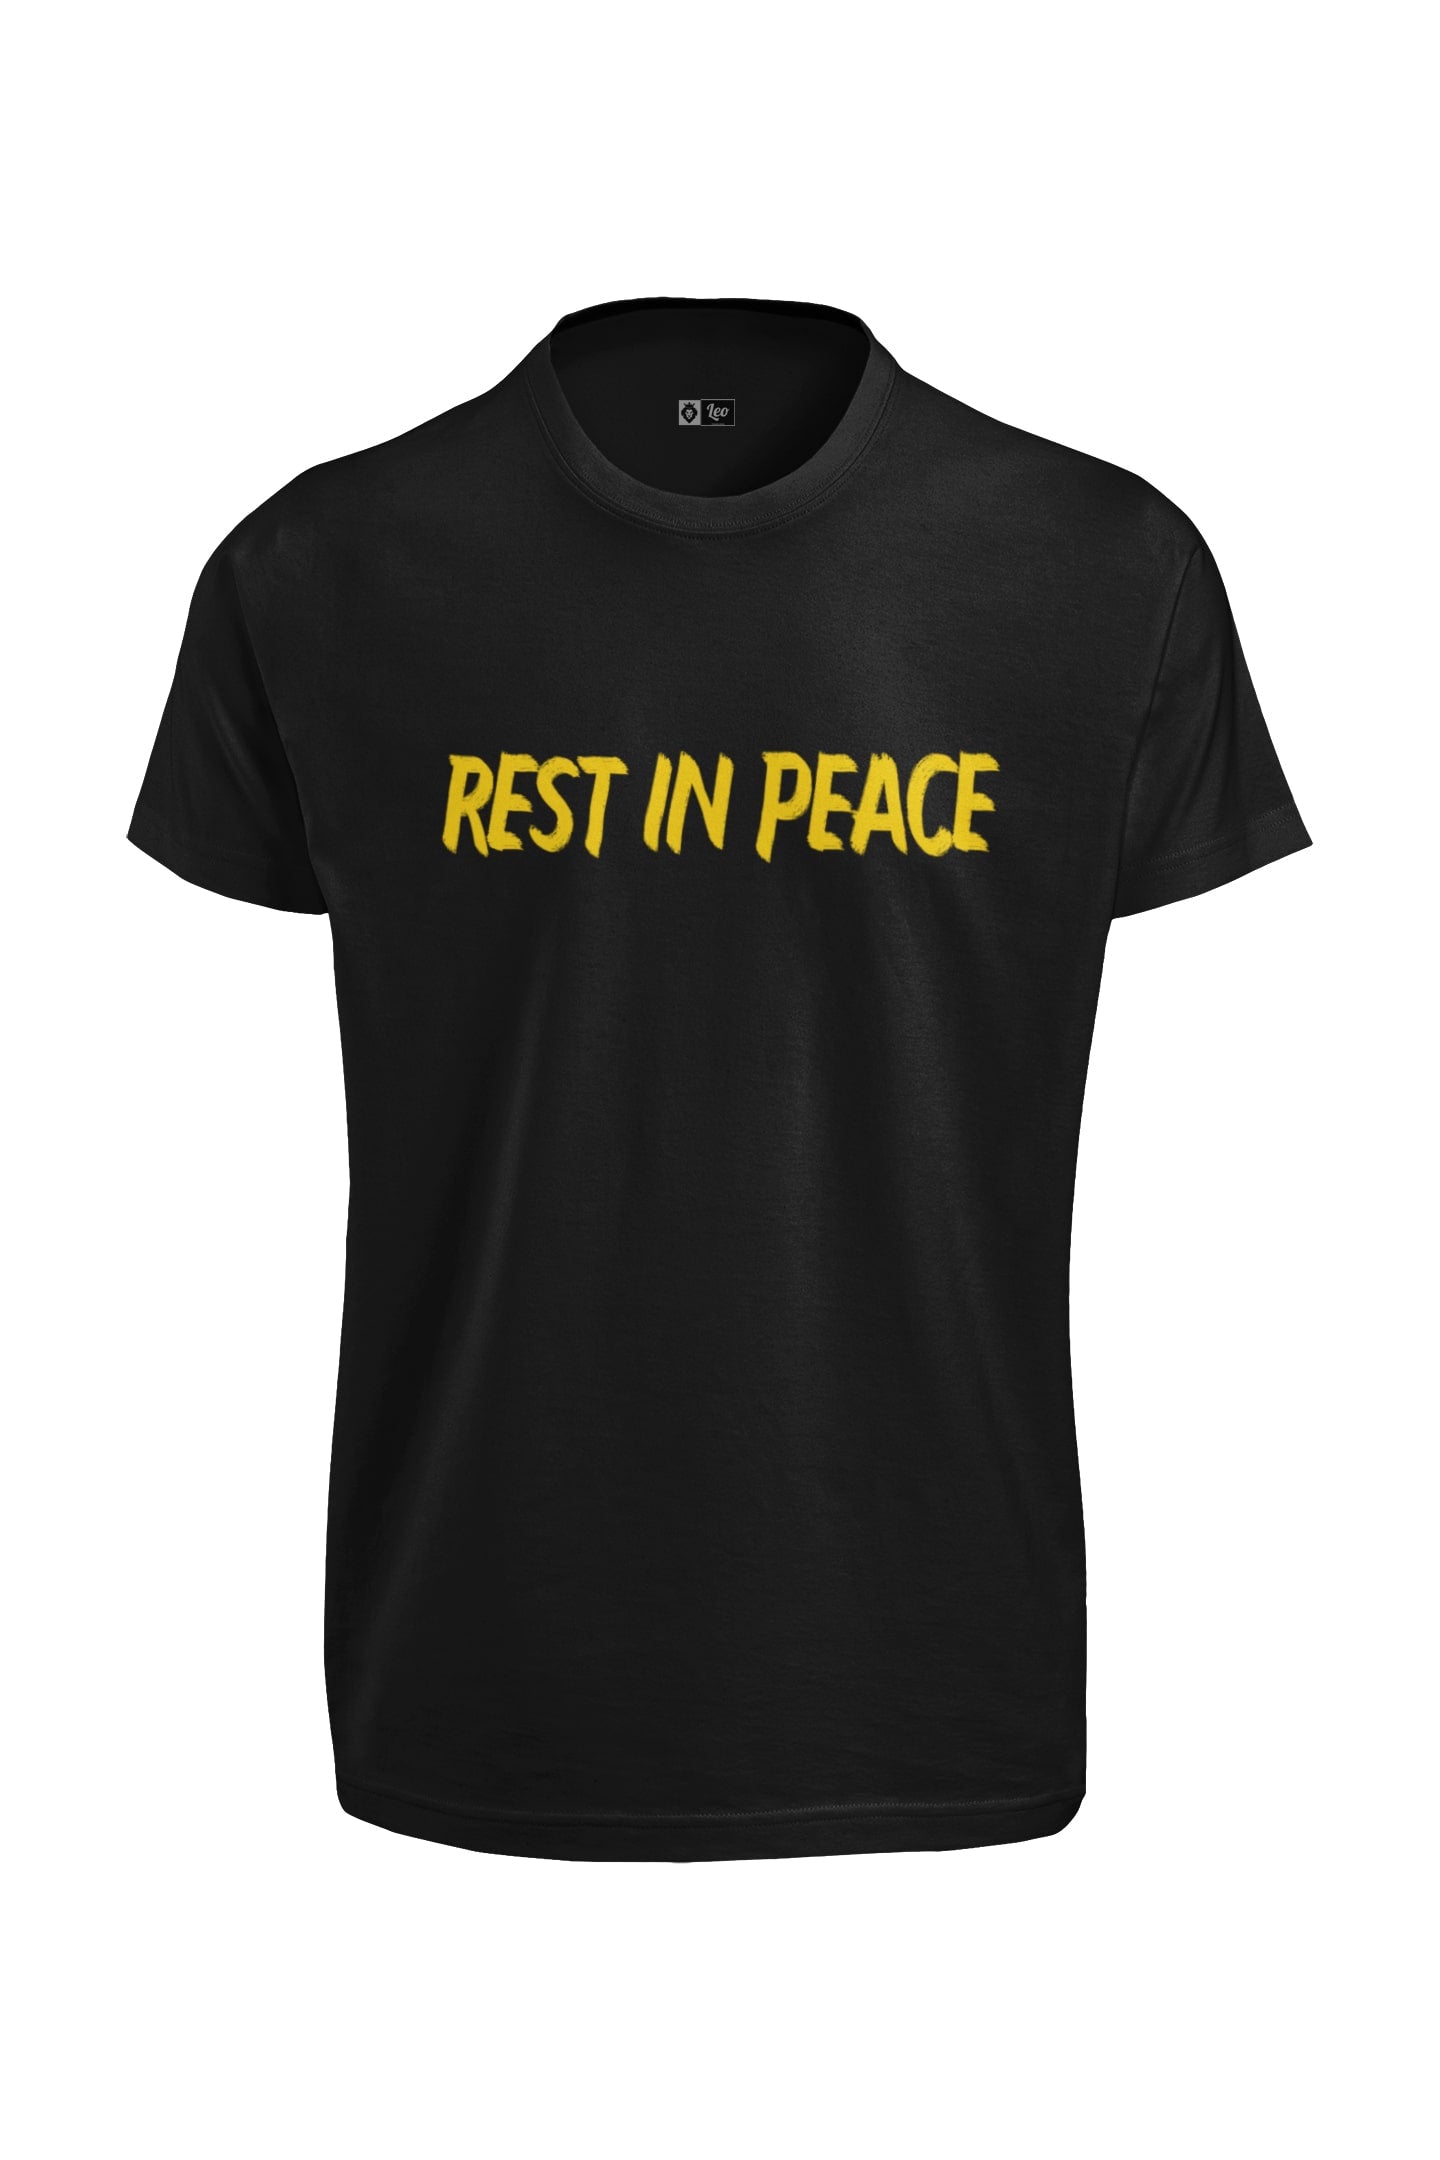 Rest in Peace T-Shirt